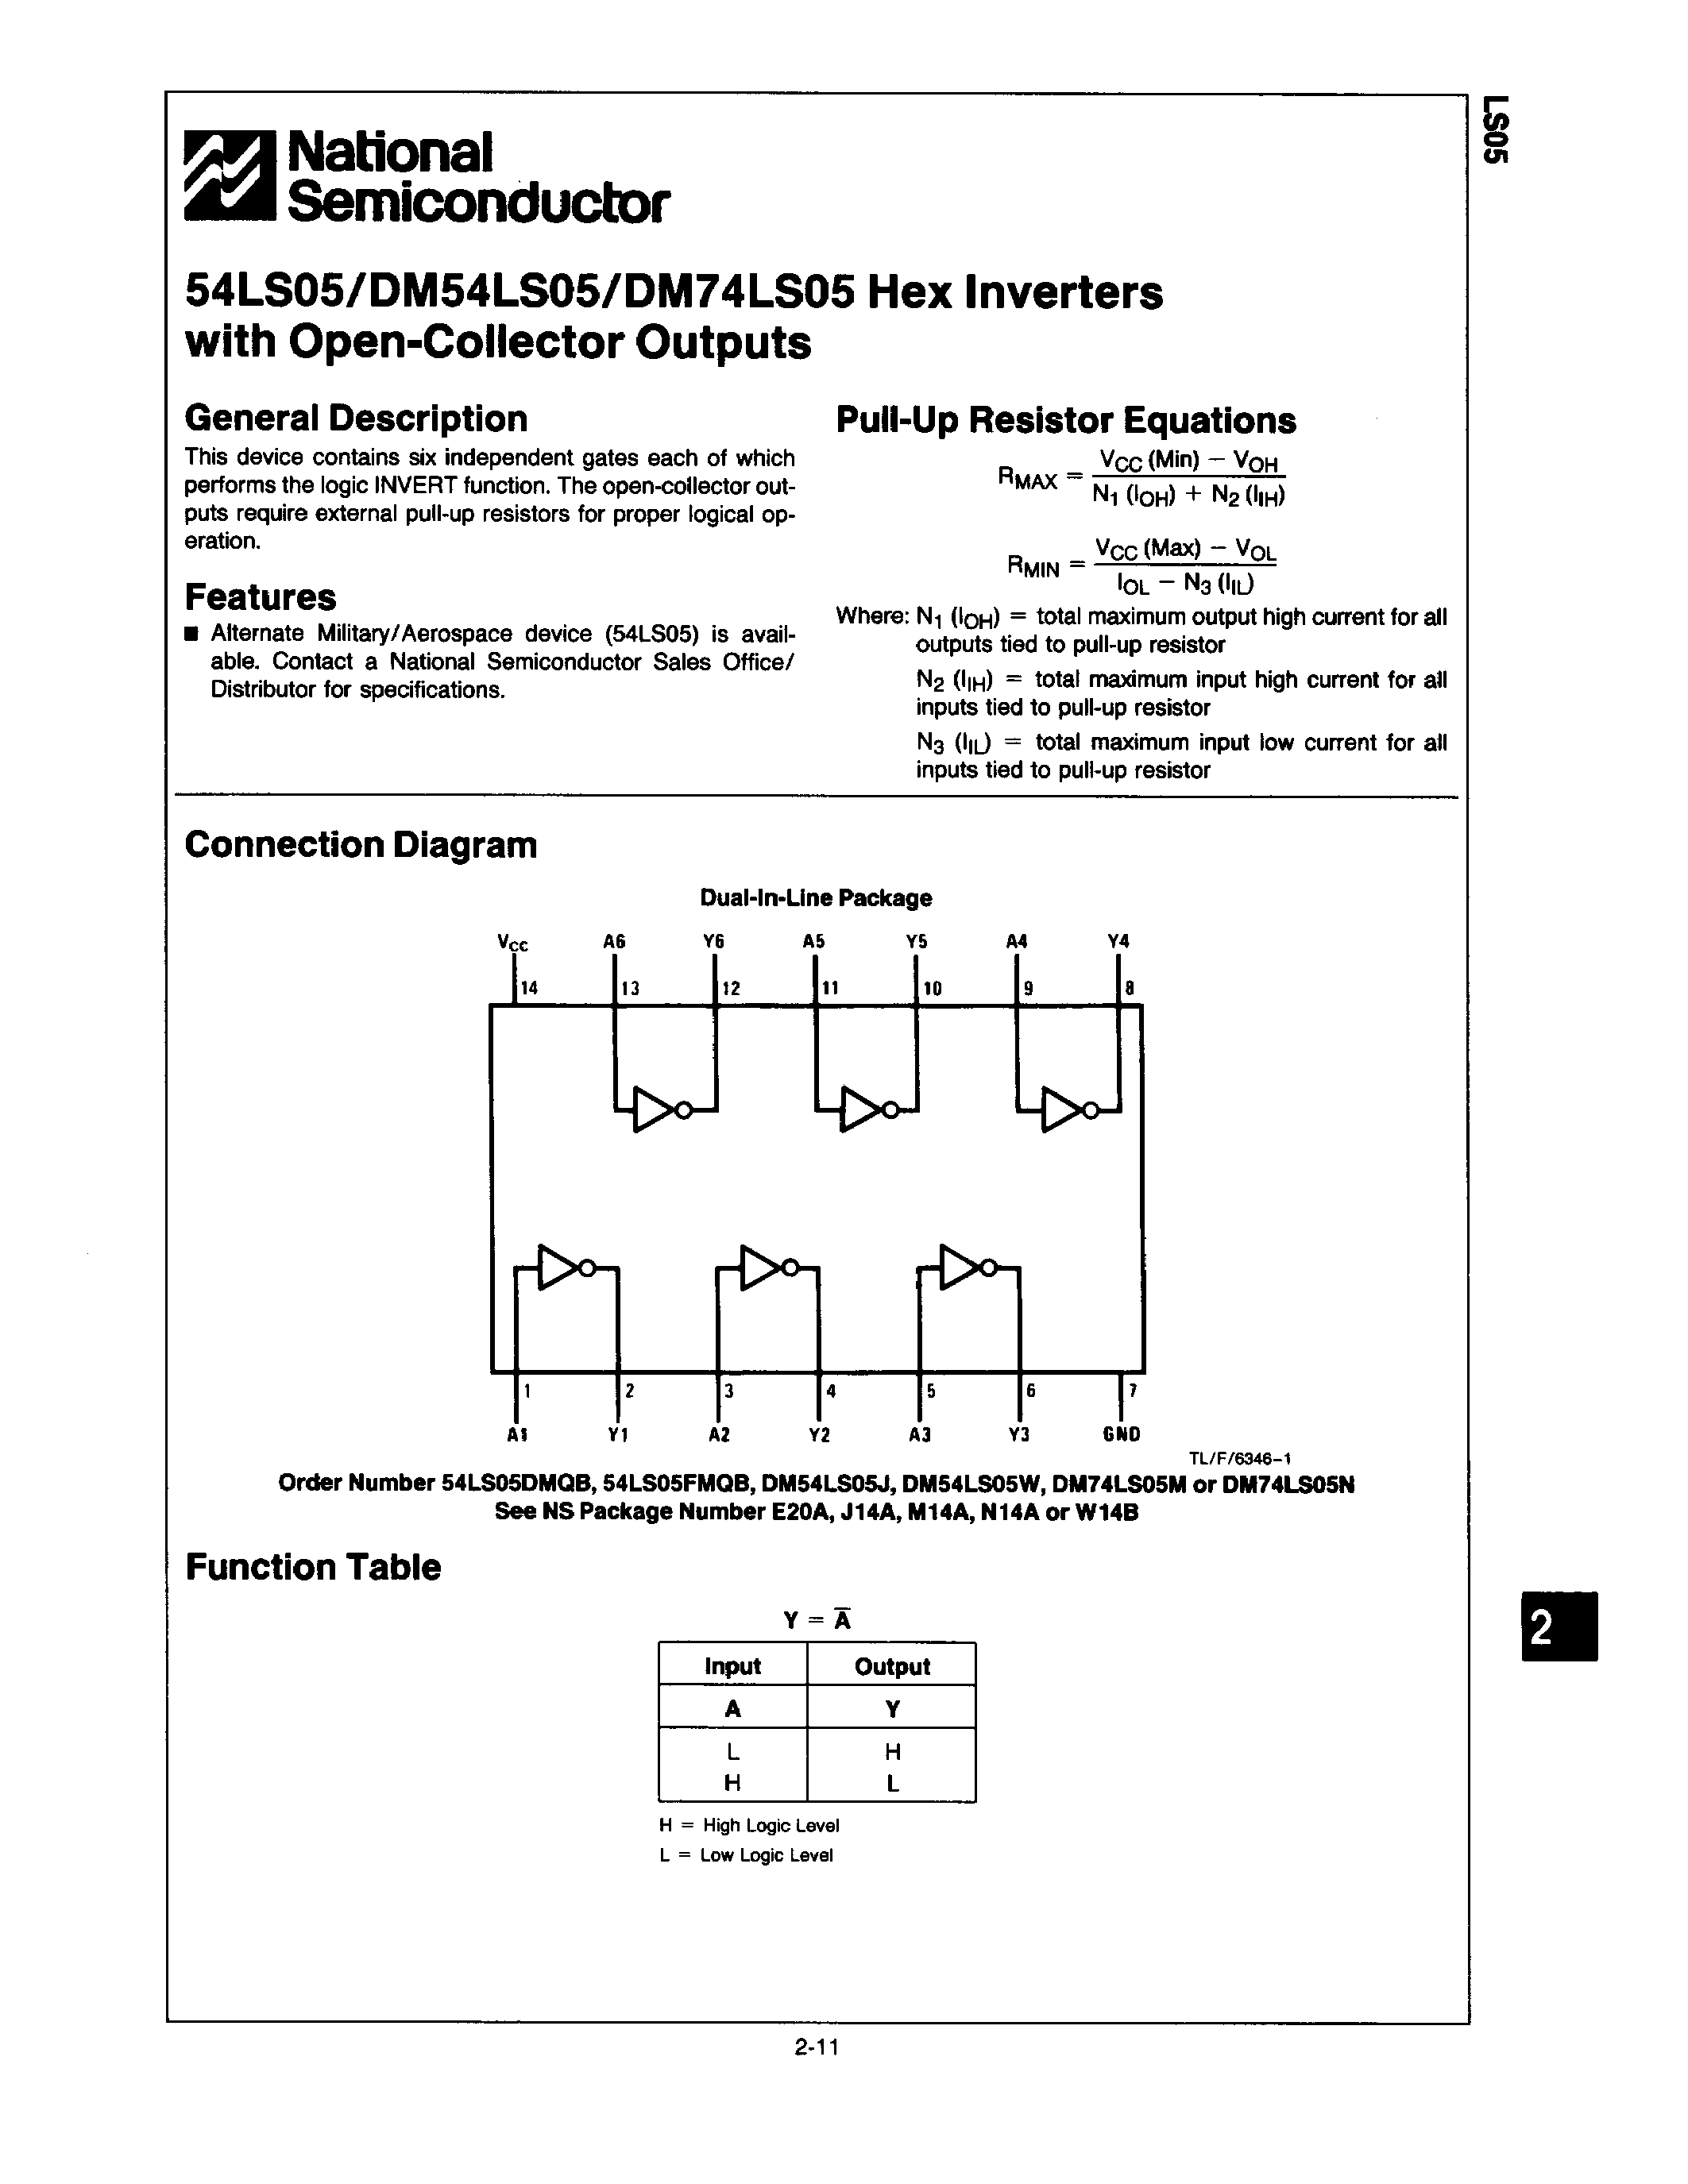 Datasheet 54LS05 - HEX INVERTERS WITH OPEN-COLLECTOR OUTPUTS page 1